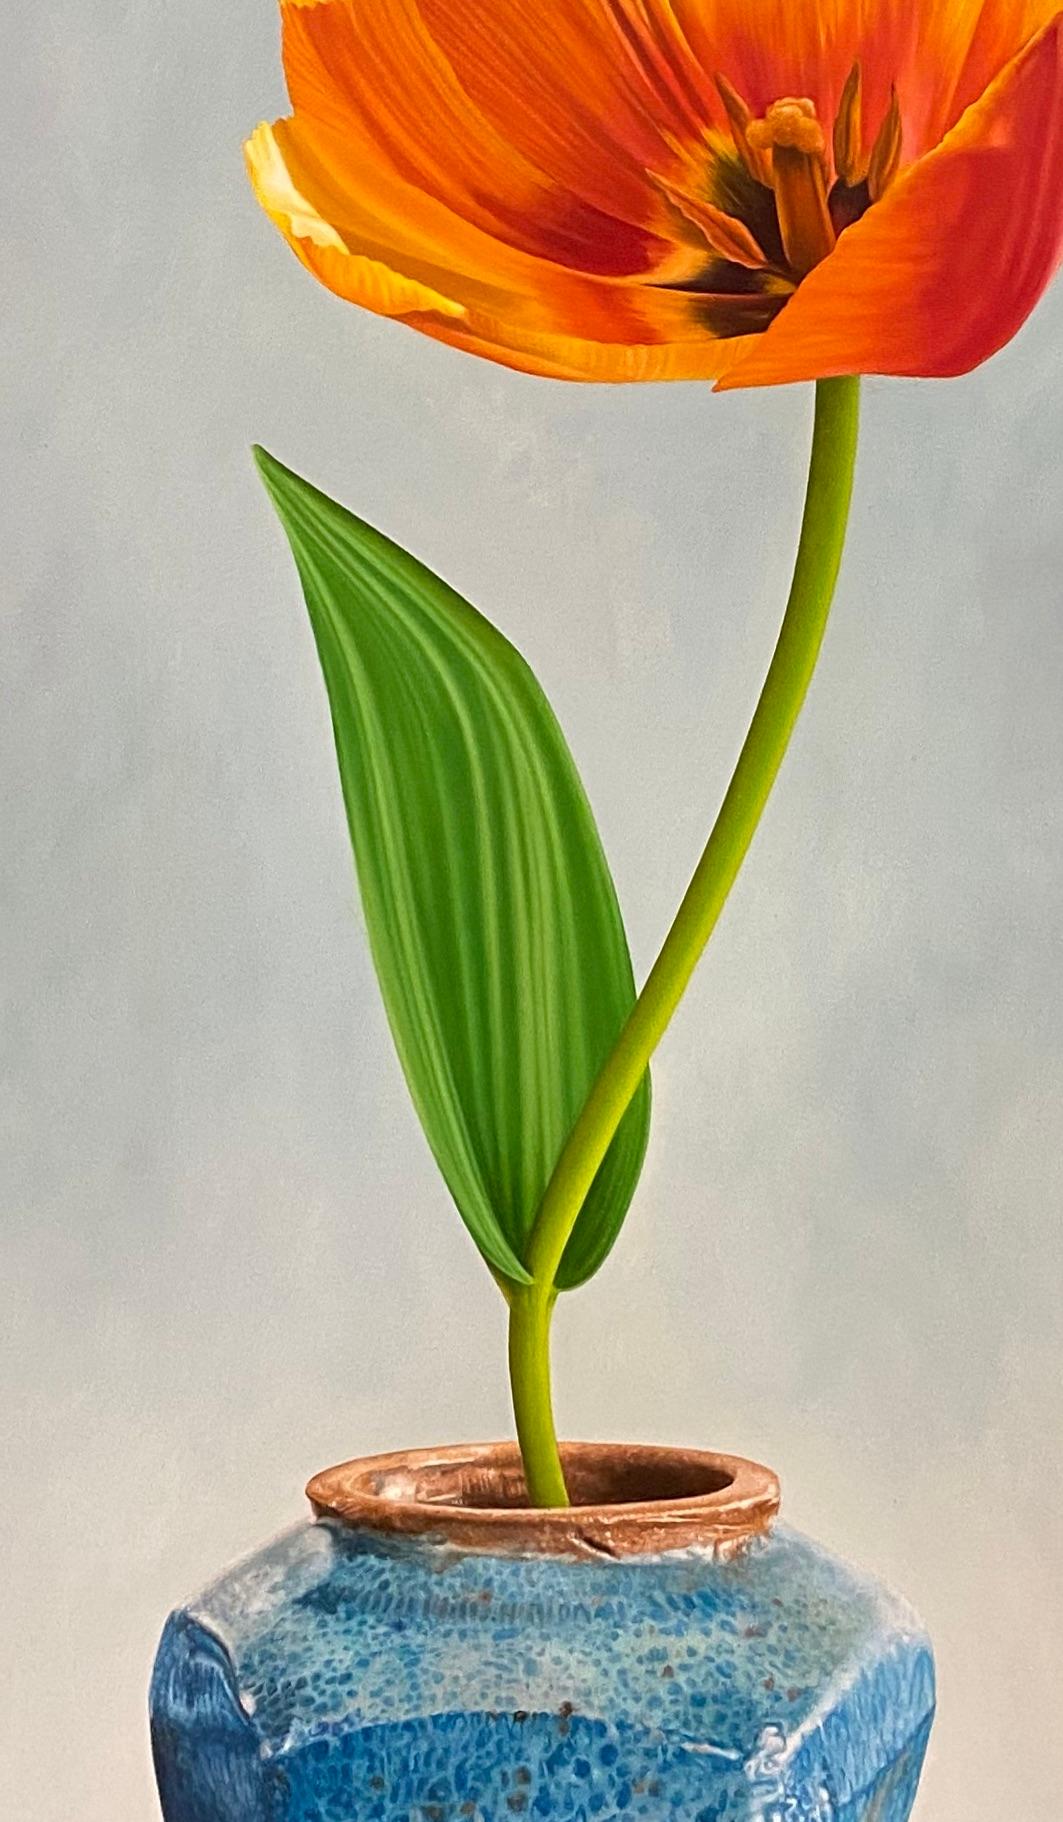 Tulip in Ginger Jar- 21st Century Dutch Oilpainting of a flower in bright colors - Painting by JP Marsman